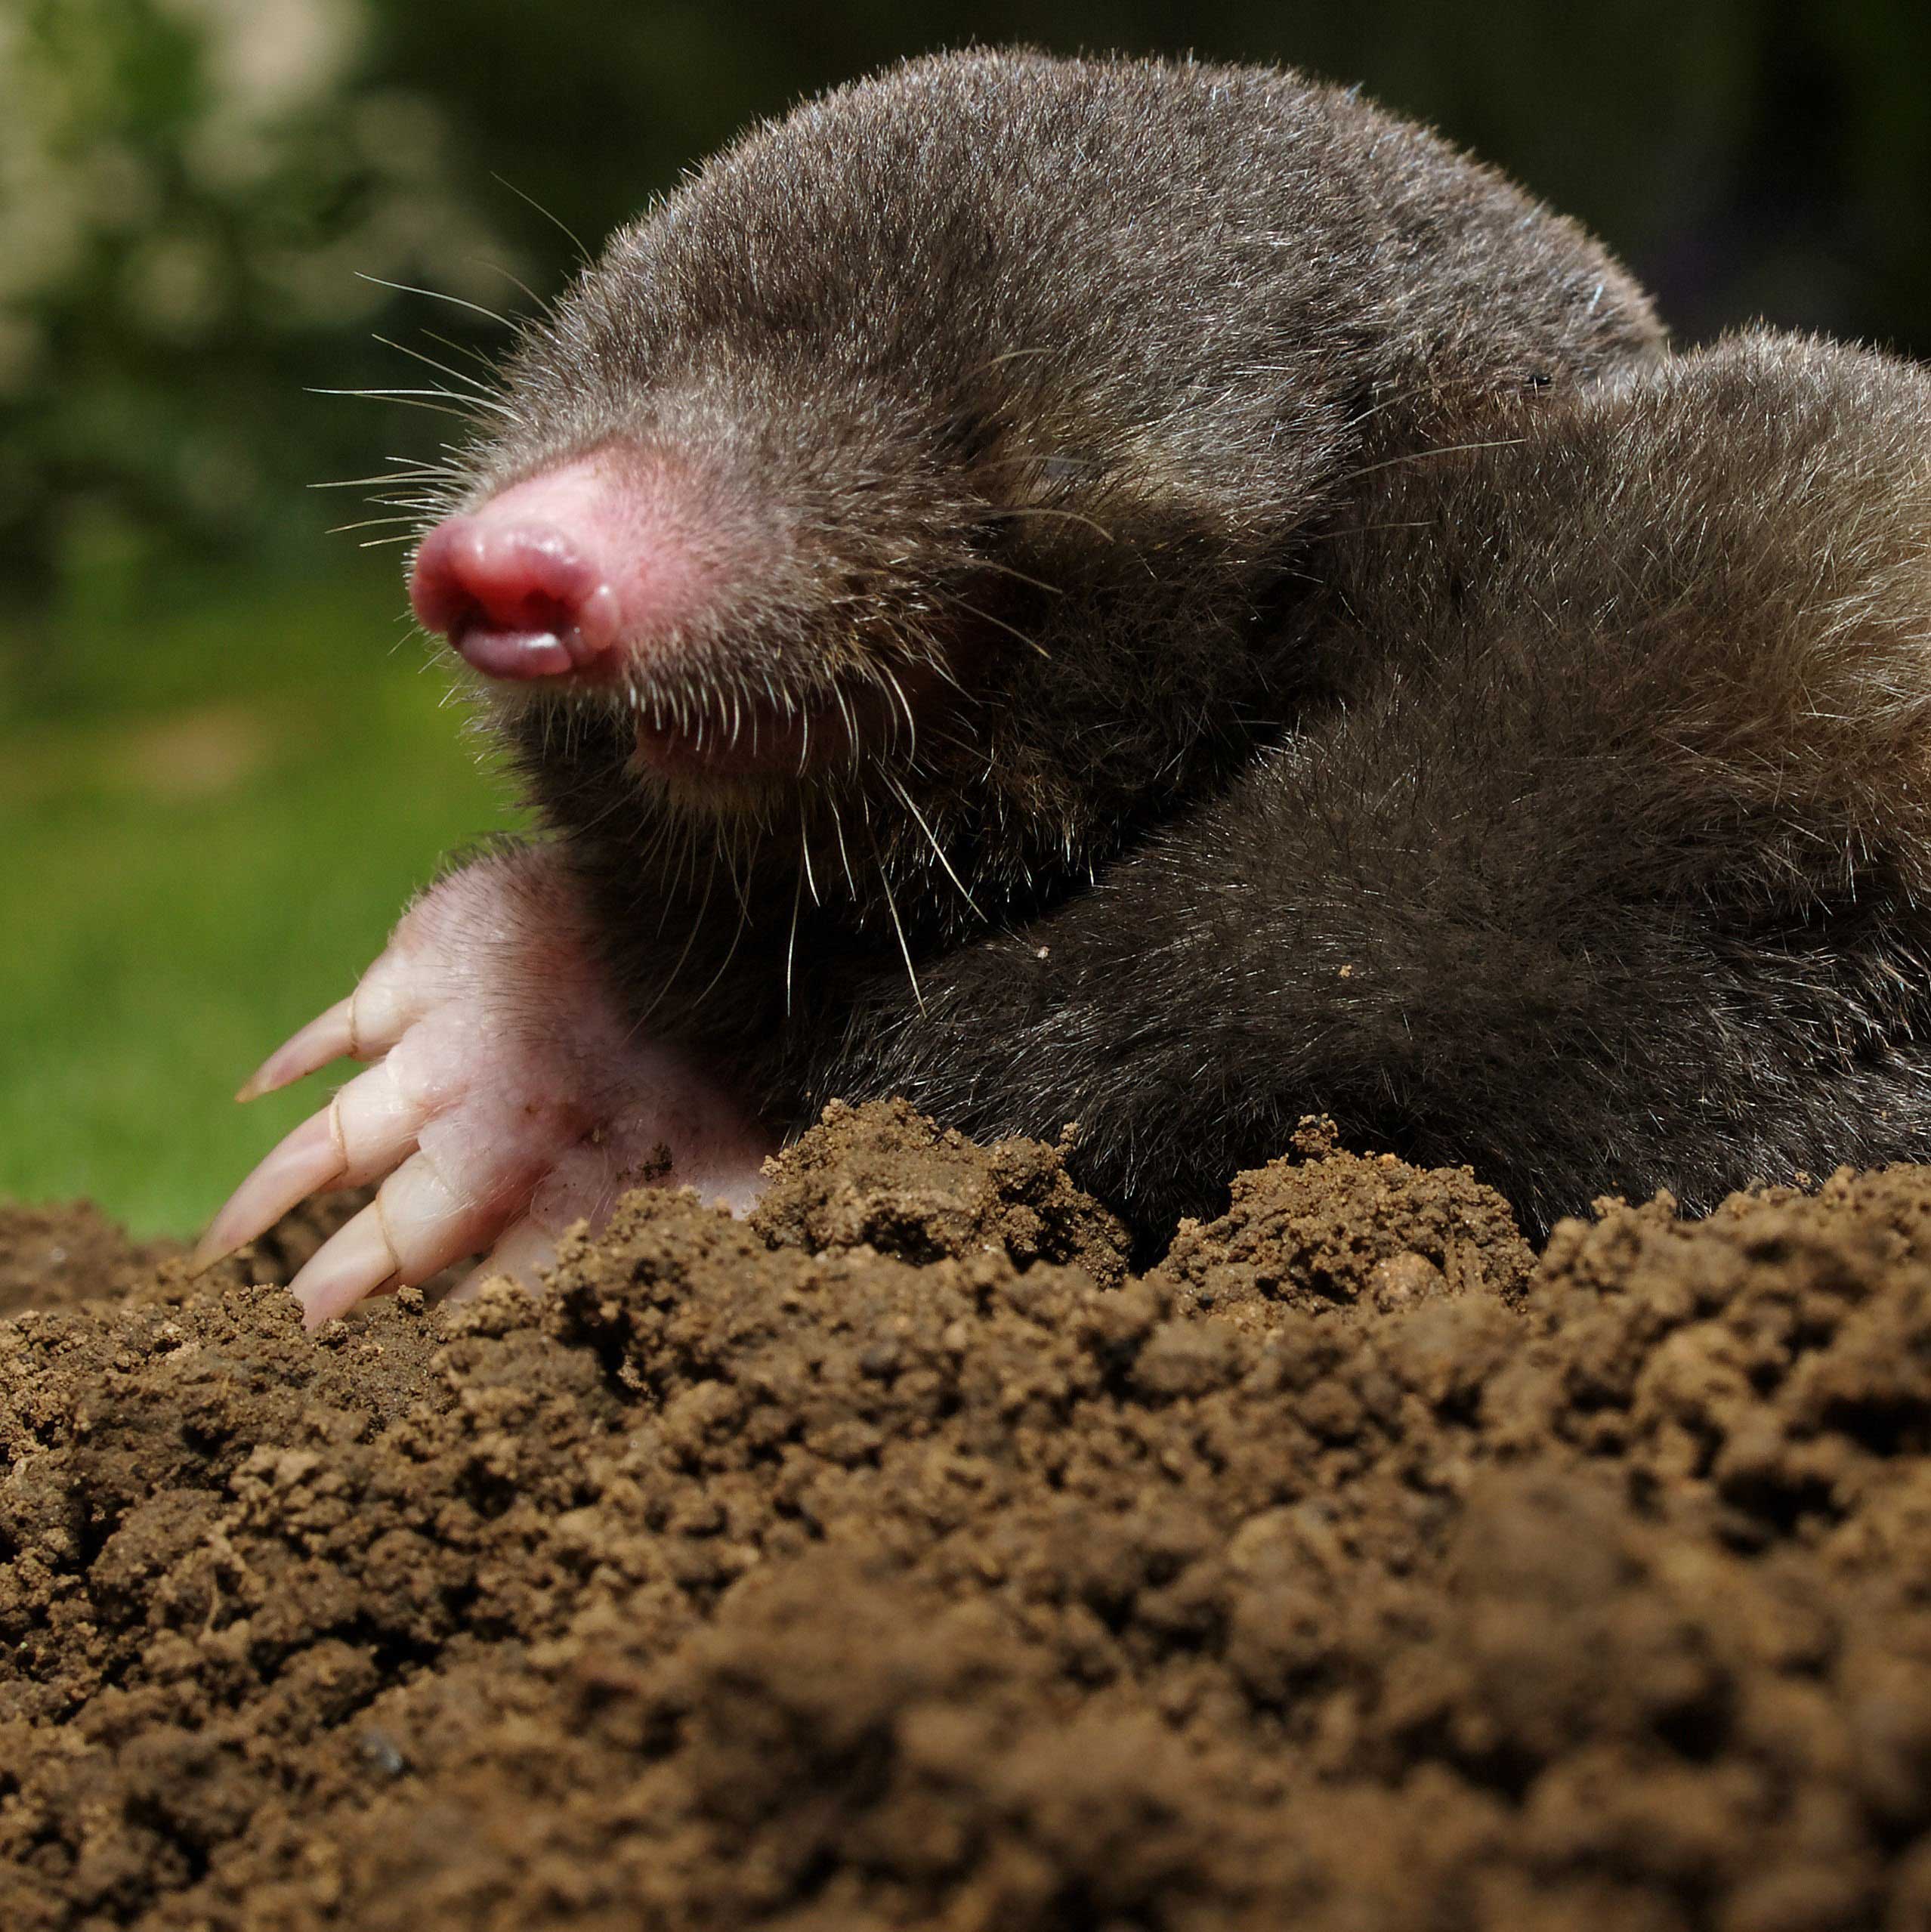 Coexisting with wildlife: Moles and voles | Forest Preserve District of  Will County